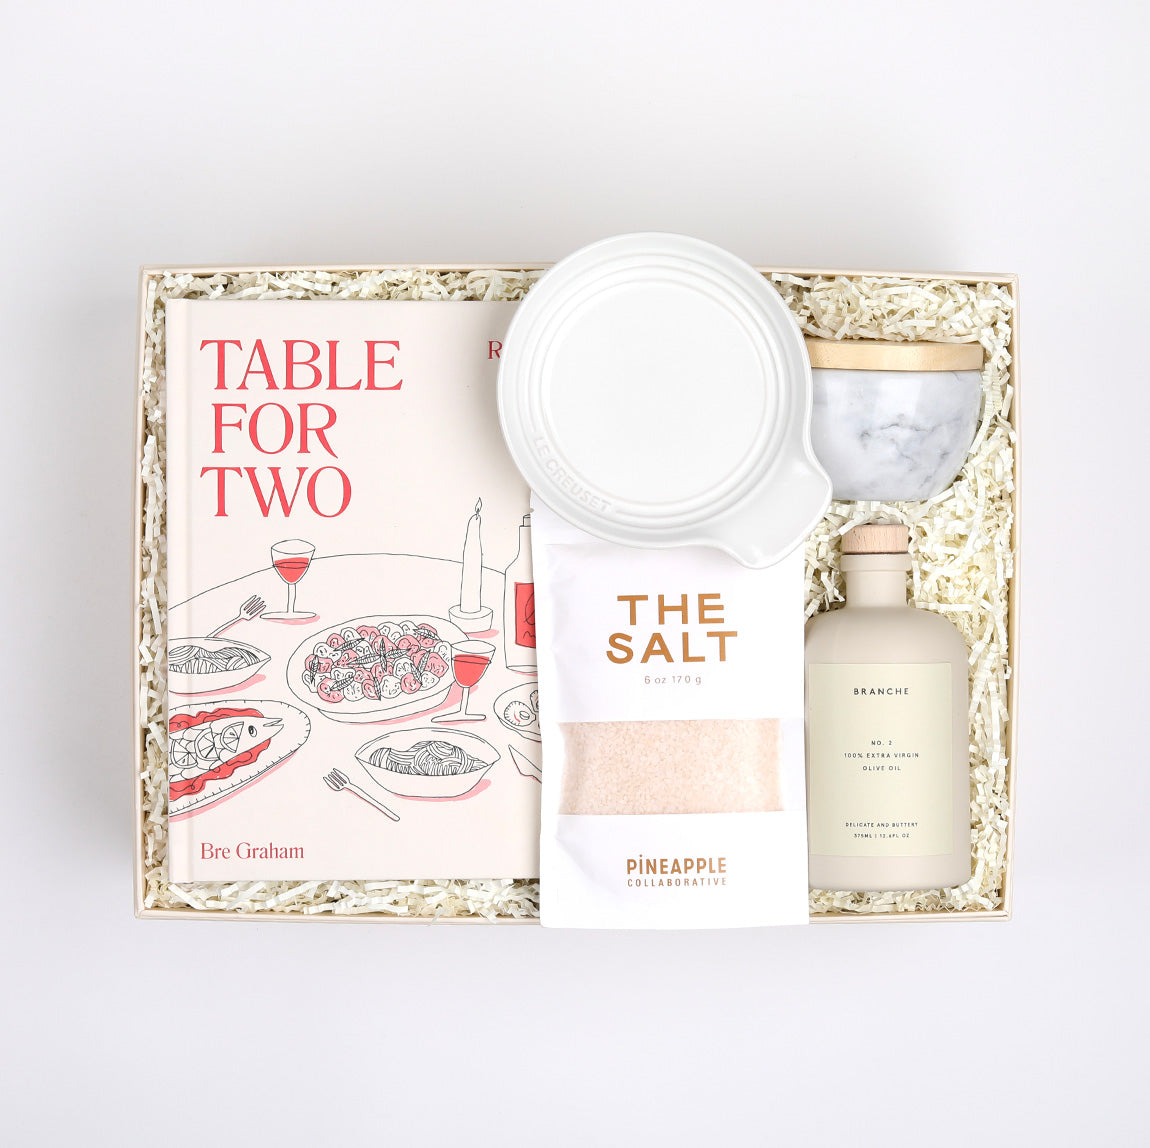 Table for Two ready to ship in creme featuring &quot;Table for Two&quot; cookbook, Le Creuset spoon rest, Branche olive oil, The Salt, and marble salt cellar